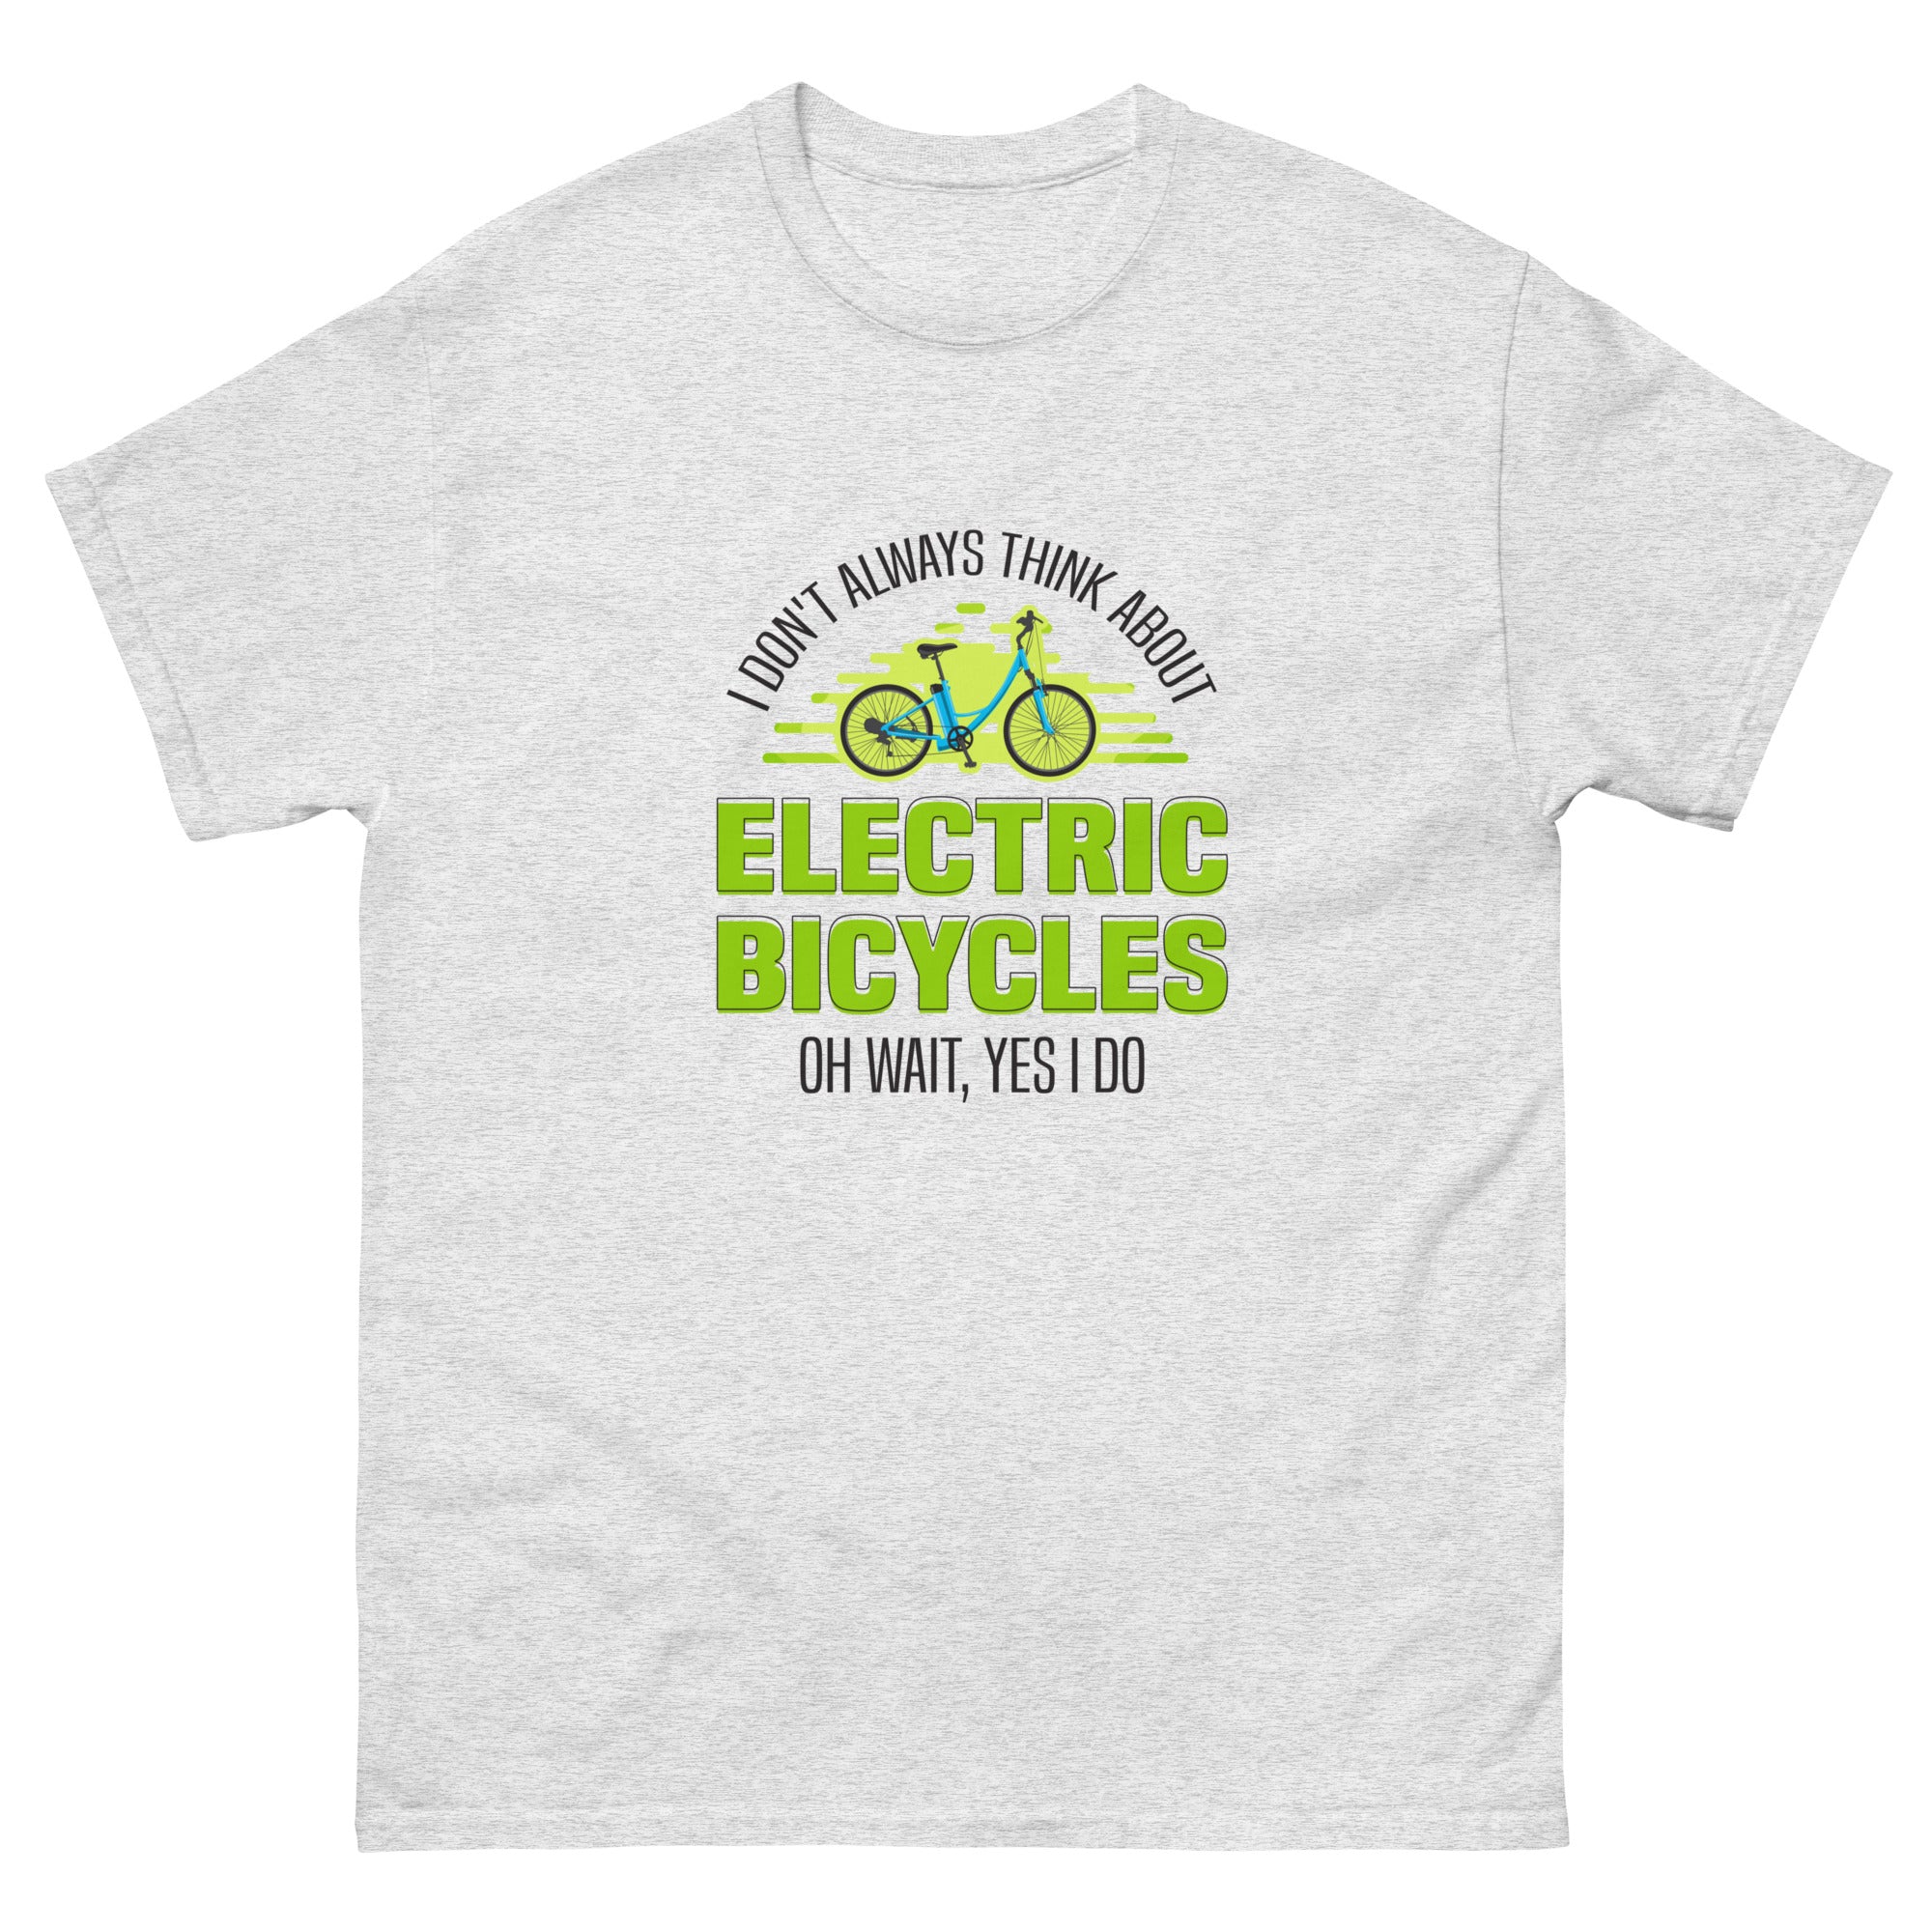 I Don't Always Think About Electric Bicycles Oh Wait, Yes I Do Gildan 5000 Men's T-shirt